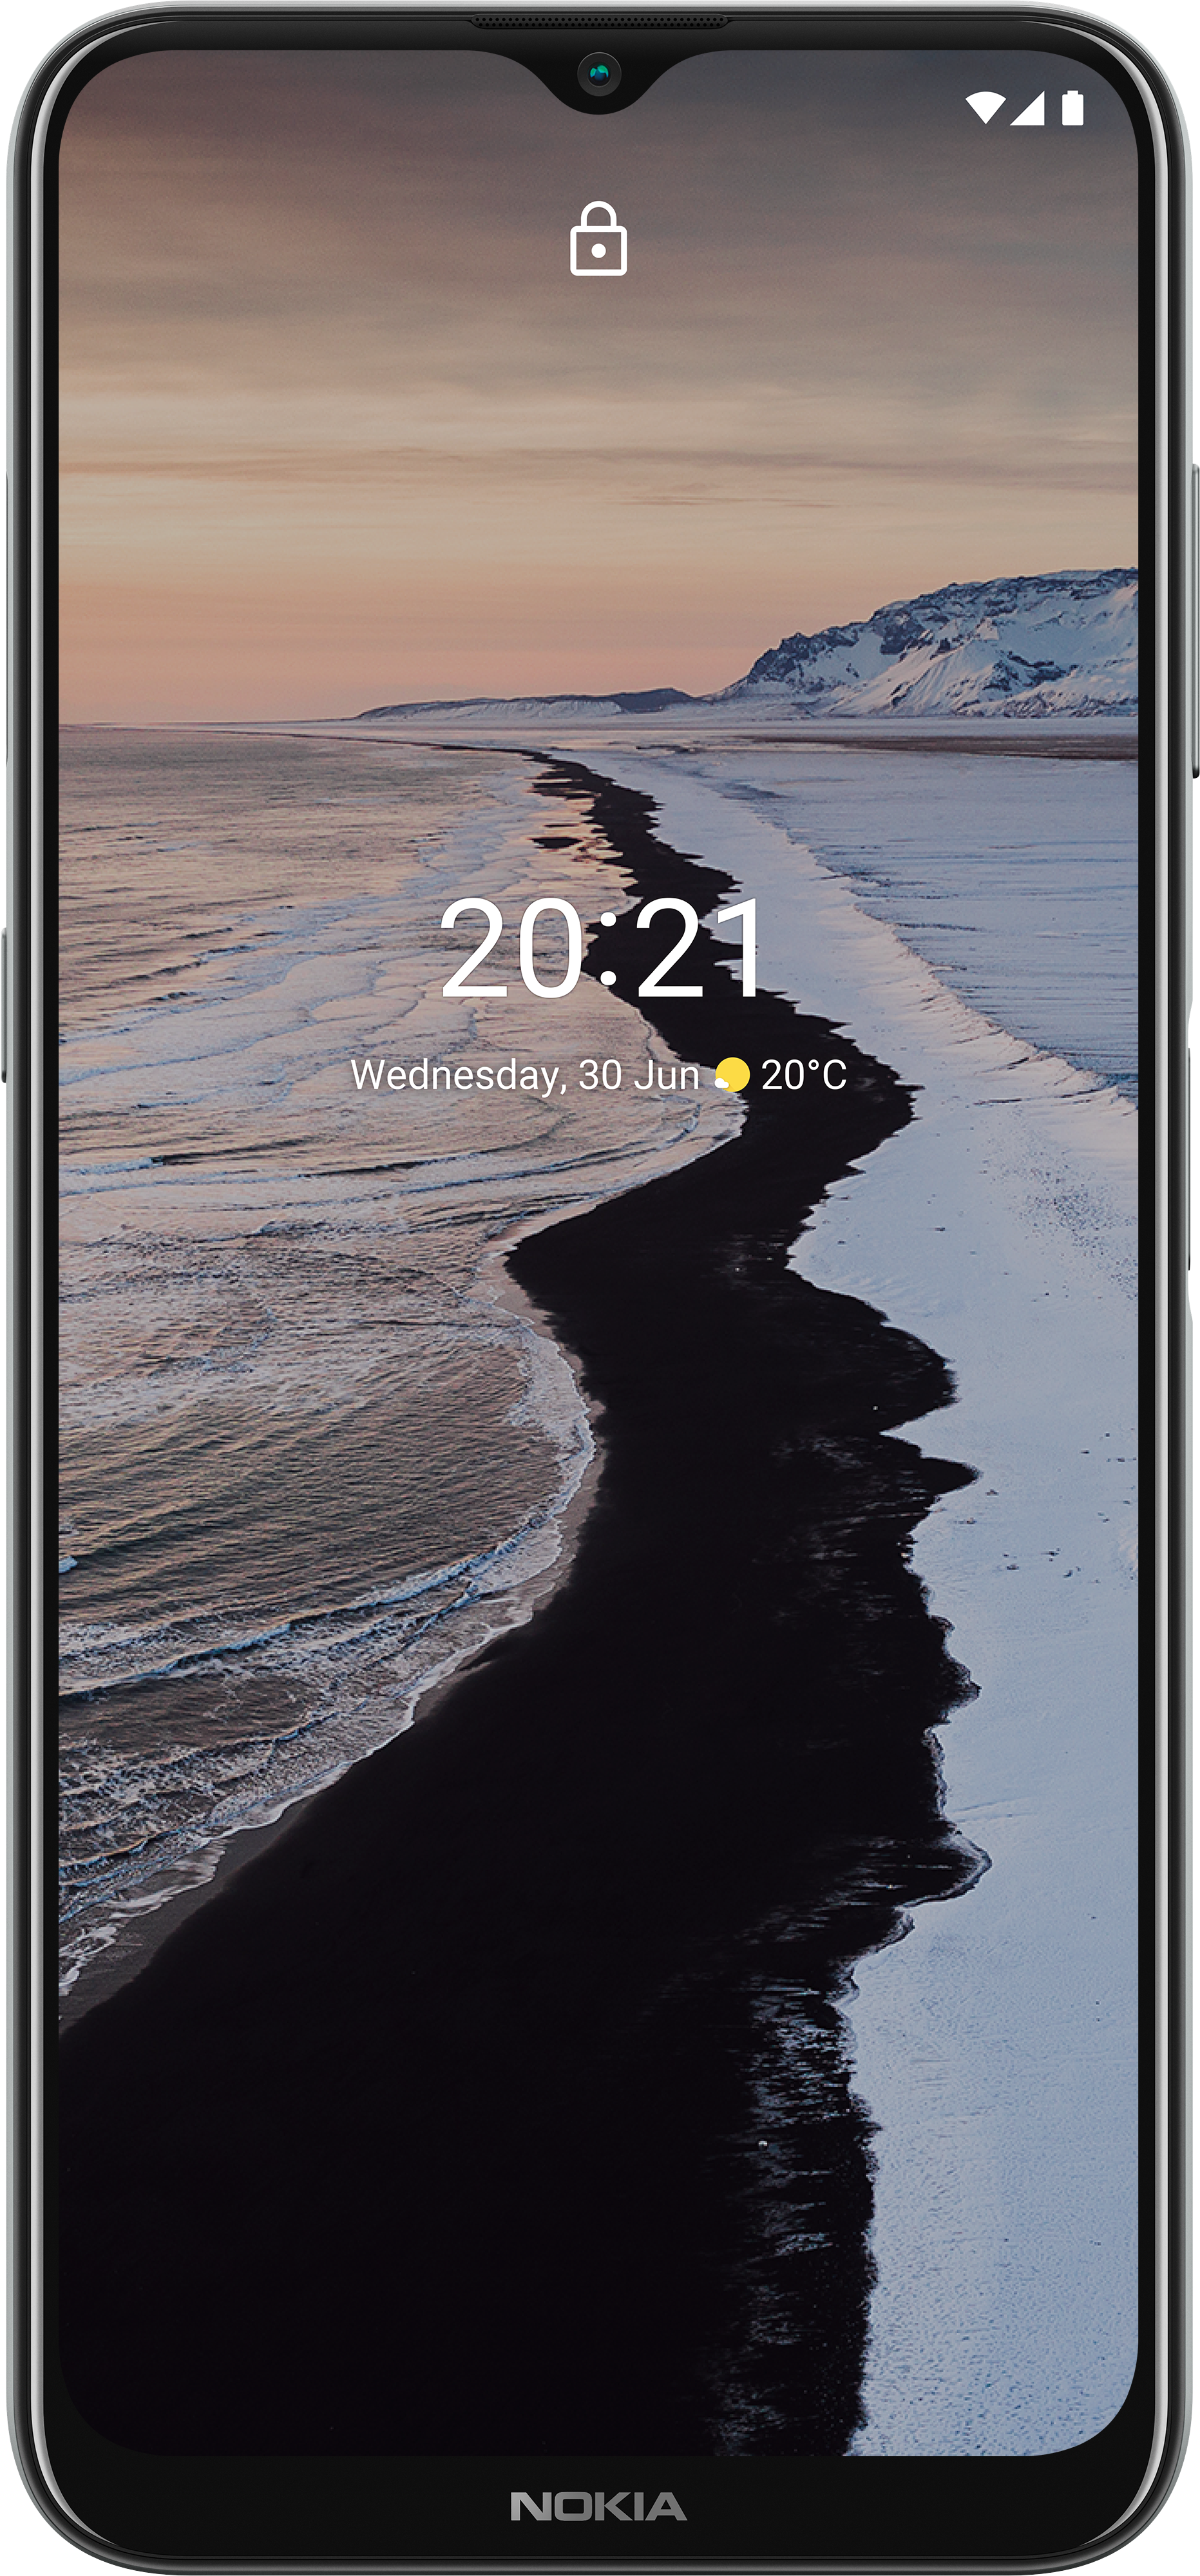 Nokia smartphones with Android | Android 10